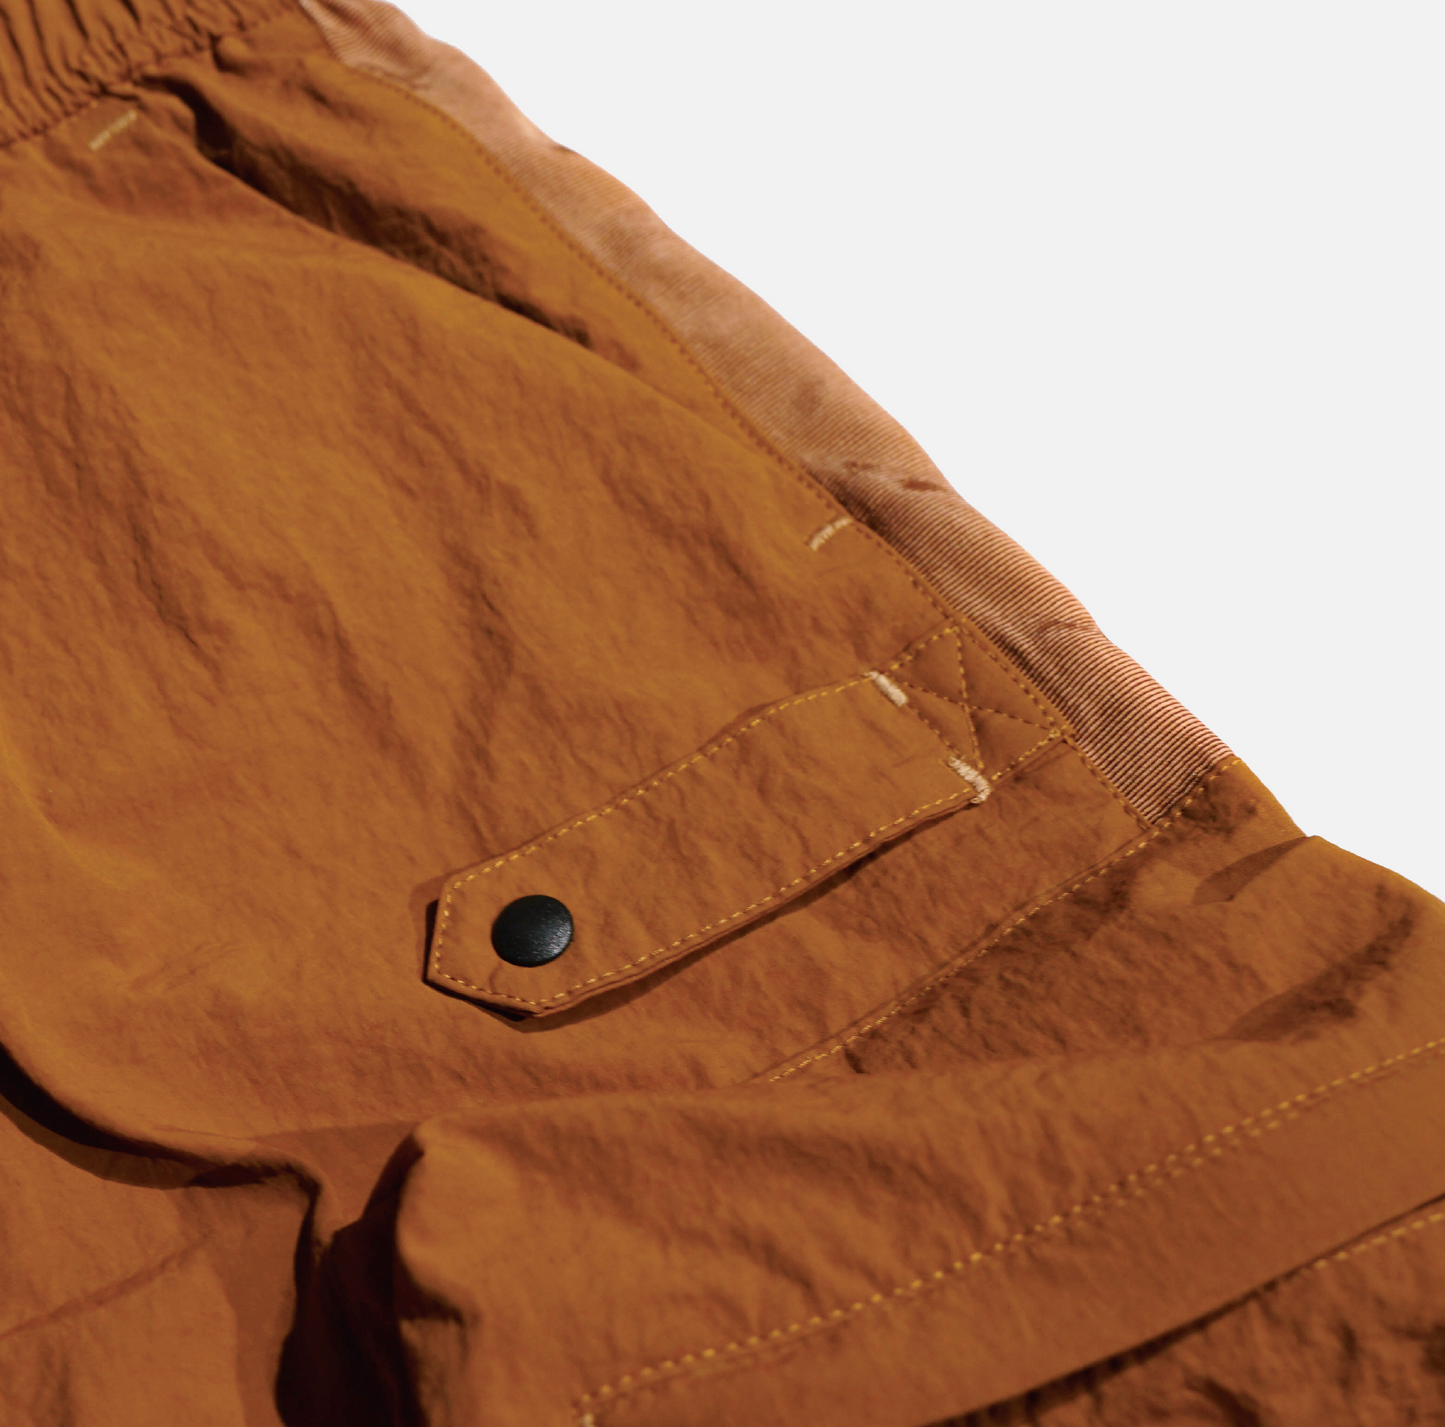 SP06 Water-Resistant Multi Pockets Shorts (ORD)